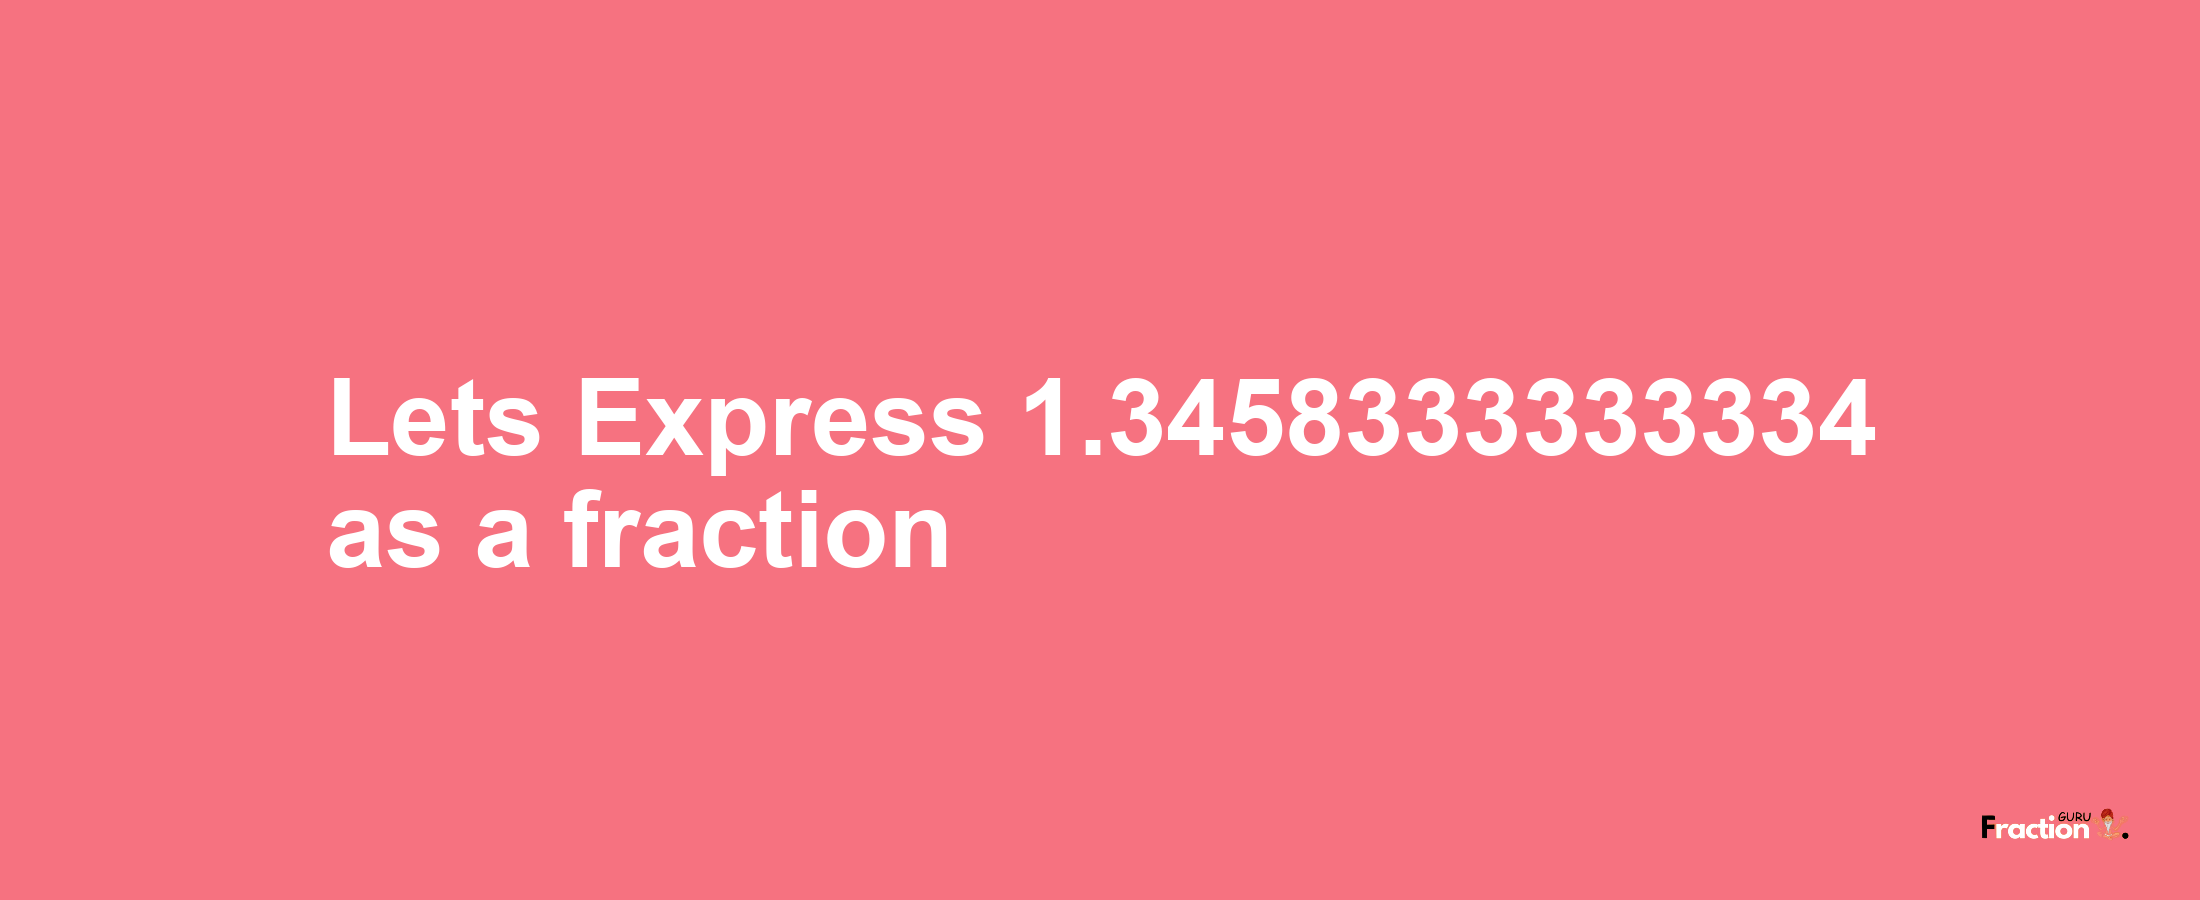 Lets Express 1.3458333333334 as afraction